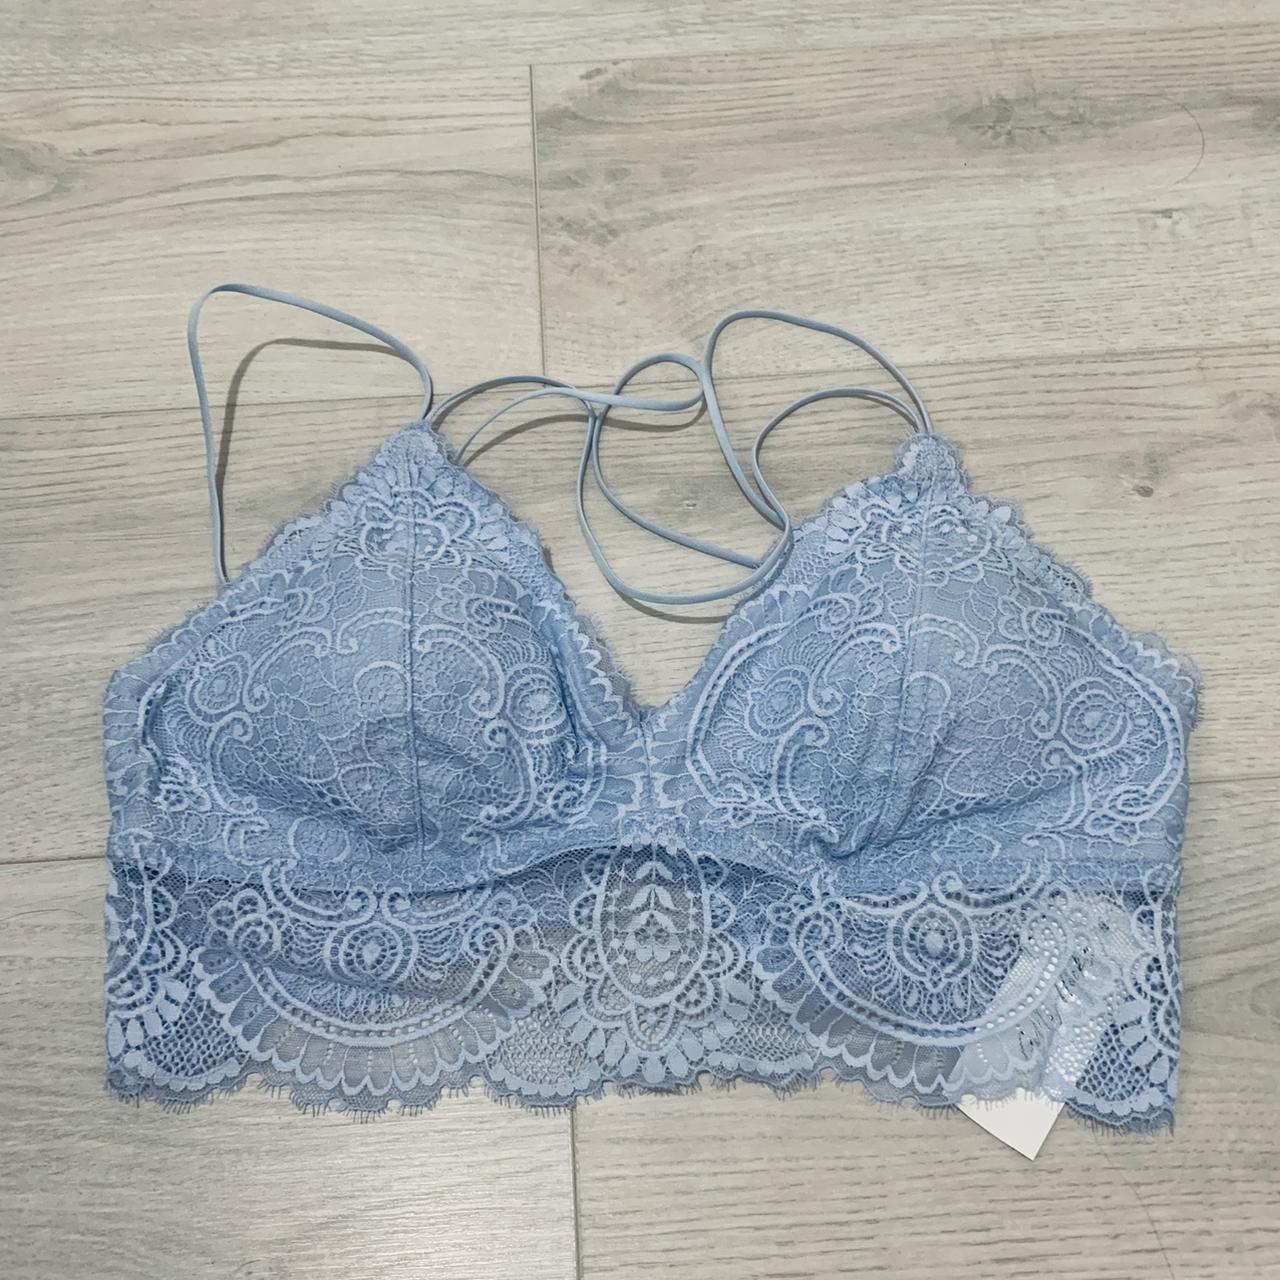 HOLLISTER Gilly Hicks Sydney NWT Lace Bralette Navy Top Small 